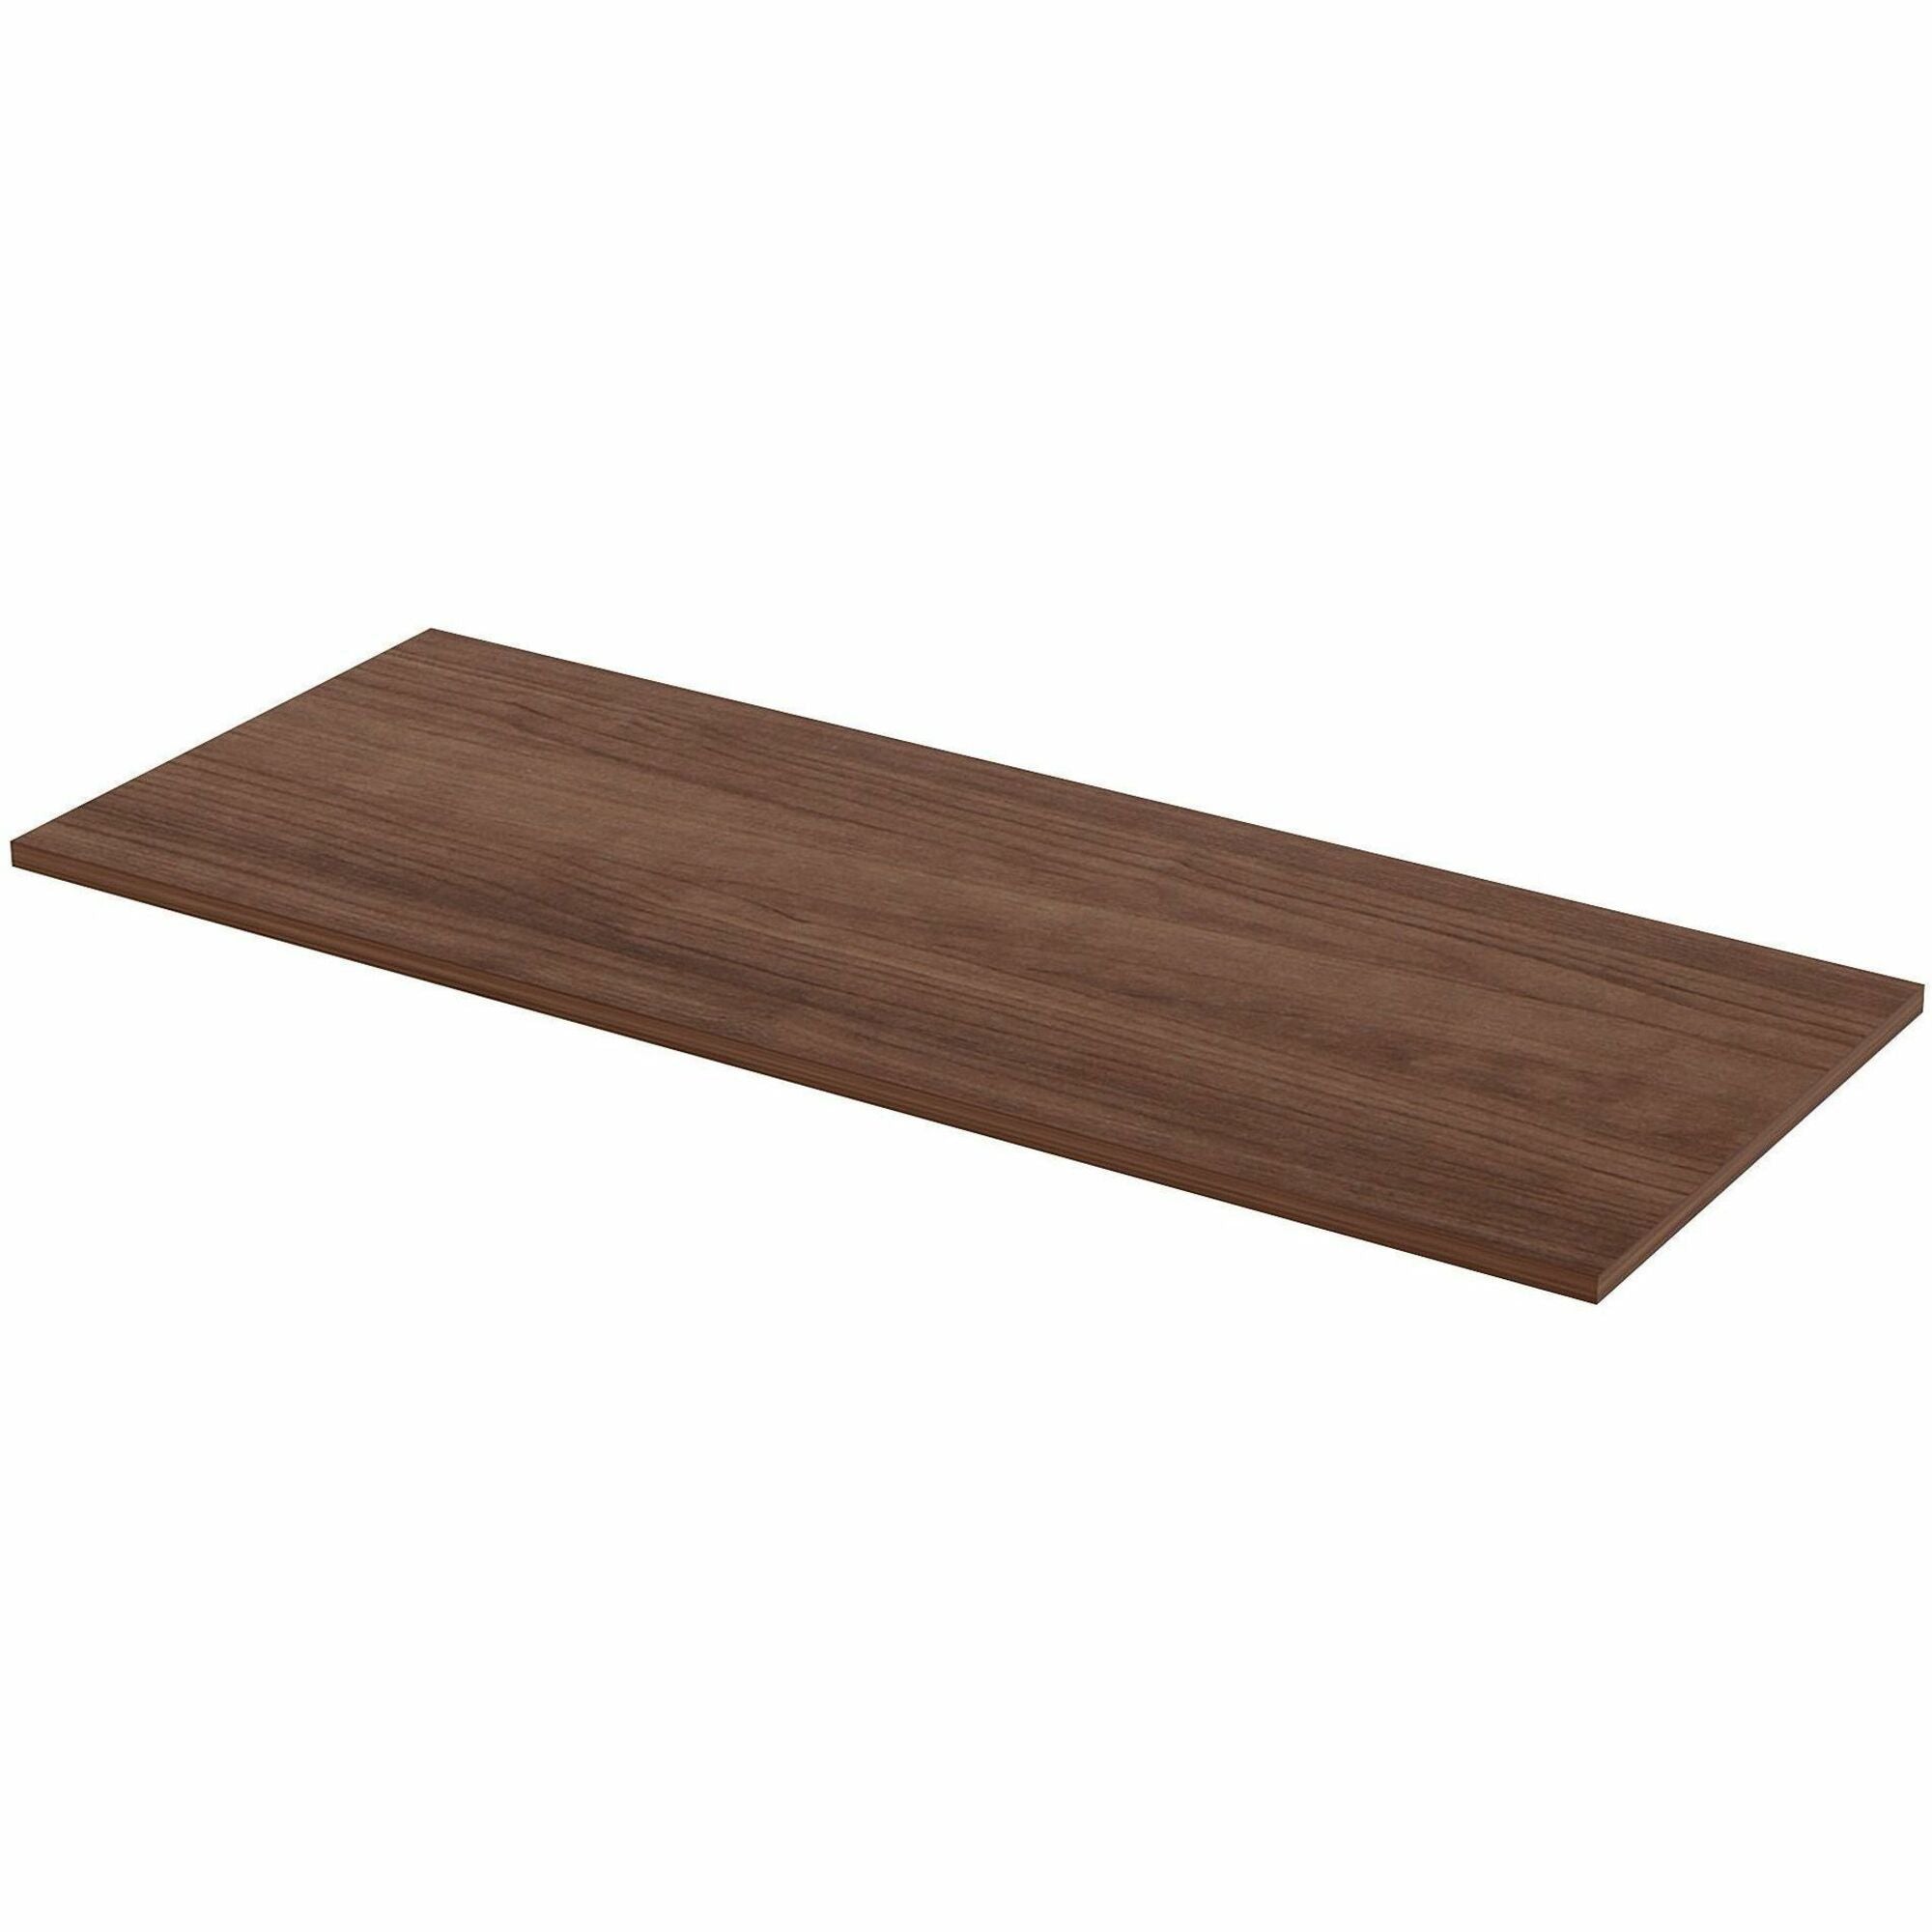 lorell-relevance-series-tabletop-for-table-topwalnut-rectangle-laminated-top-adjustable-height-x-24-table-top-width-x-60-table-top-depth-x-1-table-top-thickness-assembly-required-1-each_llr59635 - 1